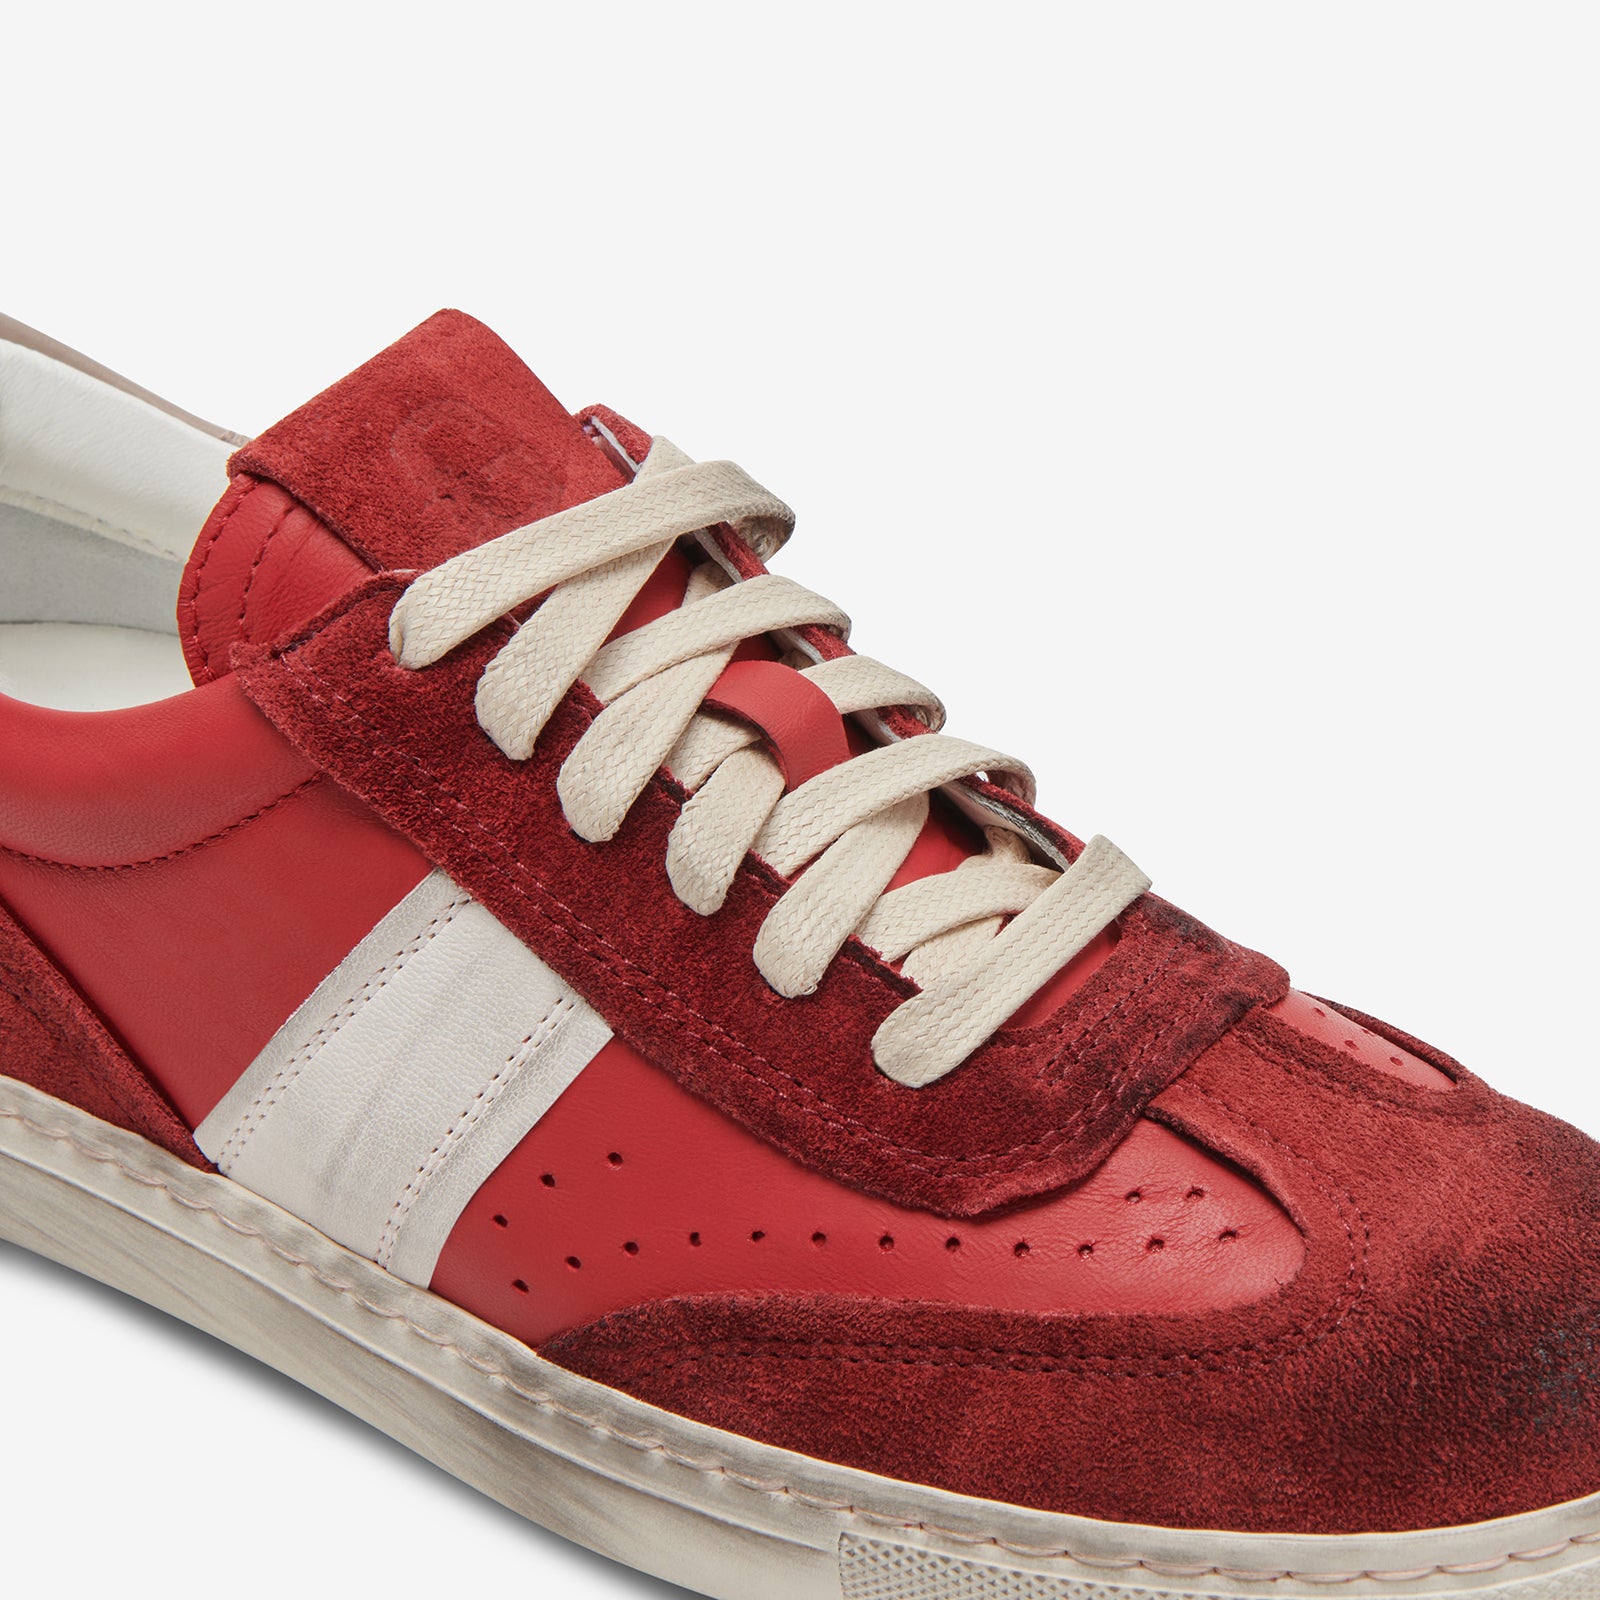 Greats - The Charlie Distressed - Red - Women's Shoe – GREATS